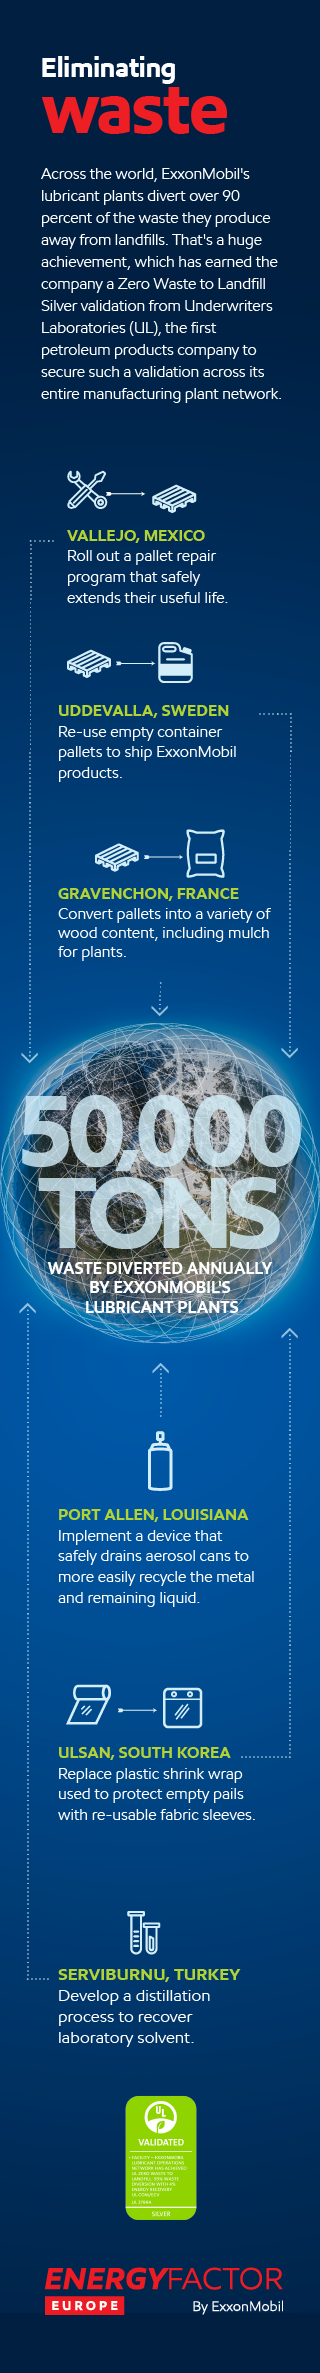 ExxonMobil’s lubricant business receives “Zero Waste to Landfill” silver validation from UL.